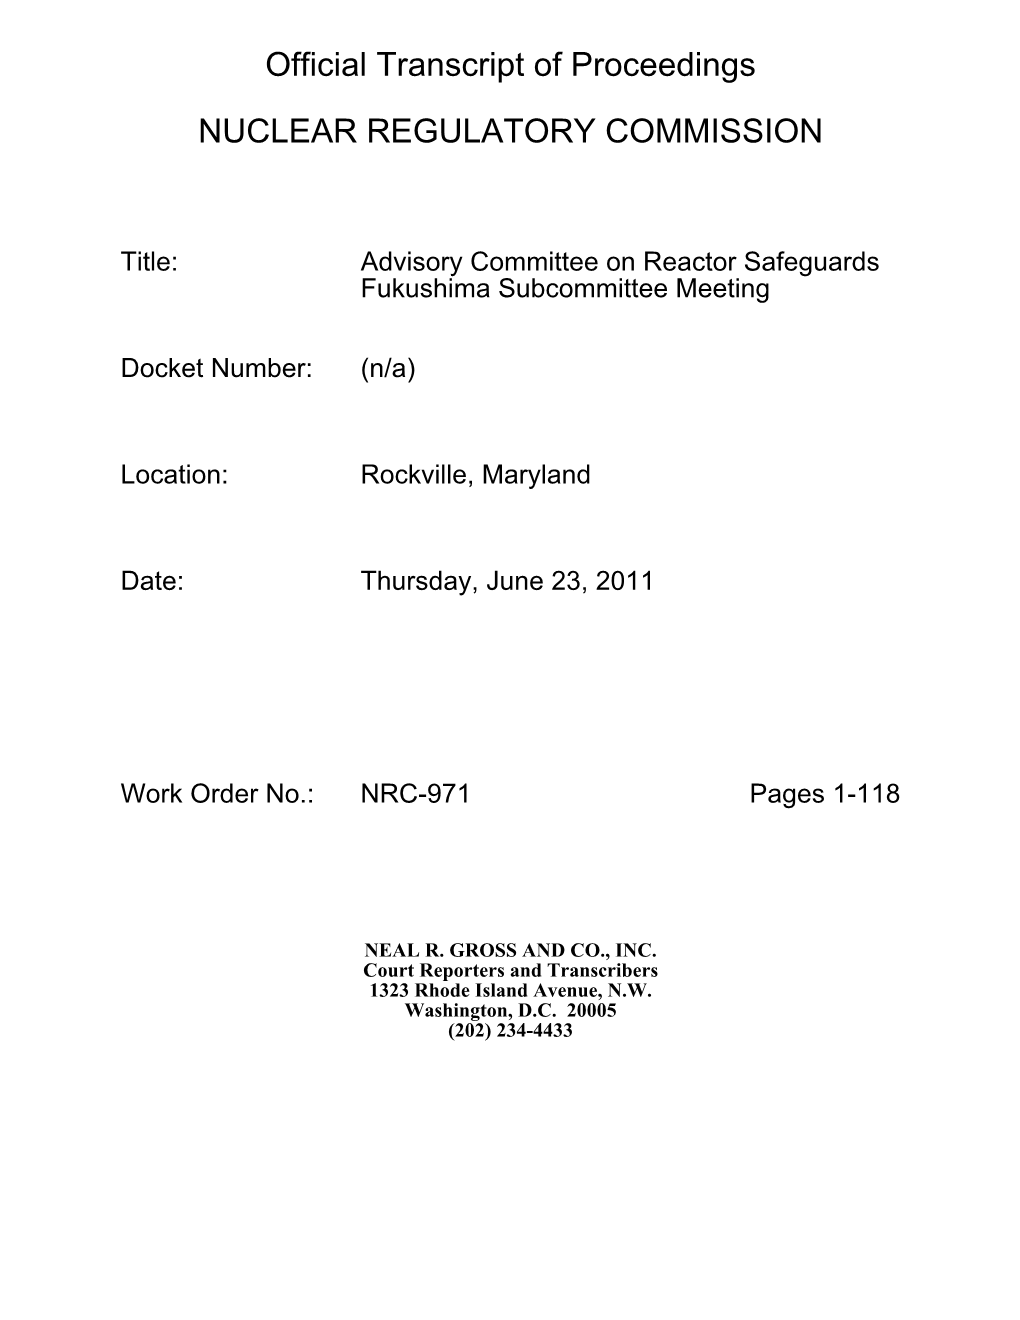 Official Transcript of Proceedings NUCLEAR REGULATORY COMMISSION